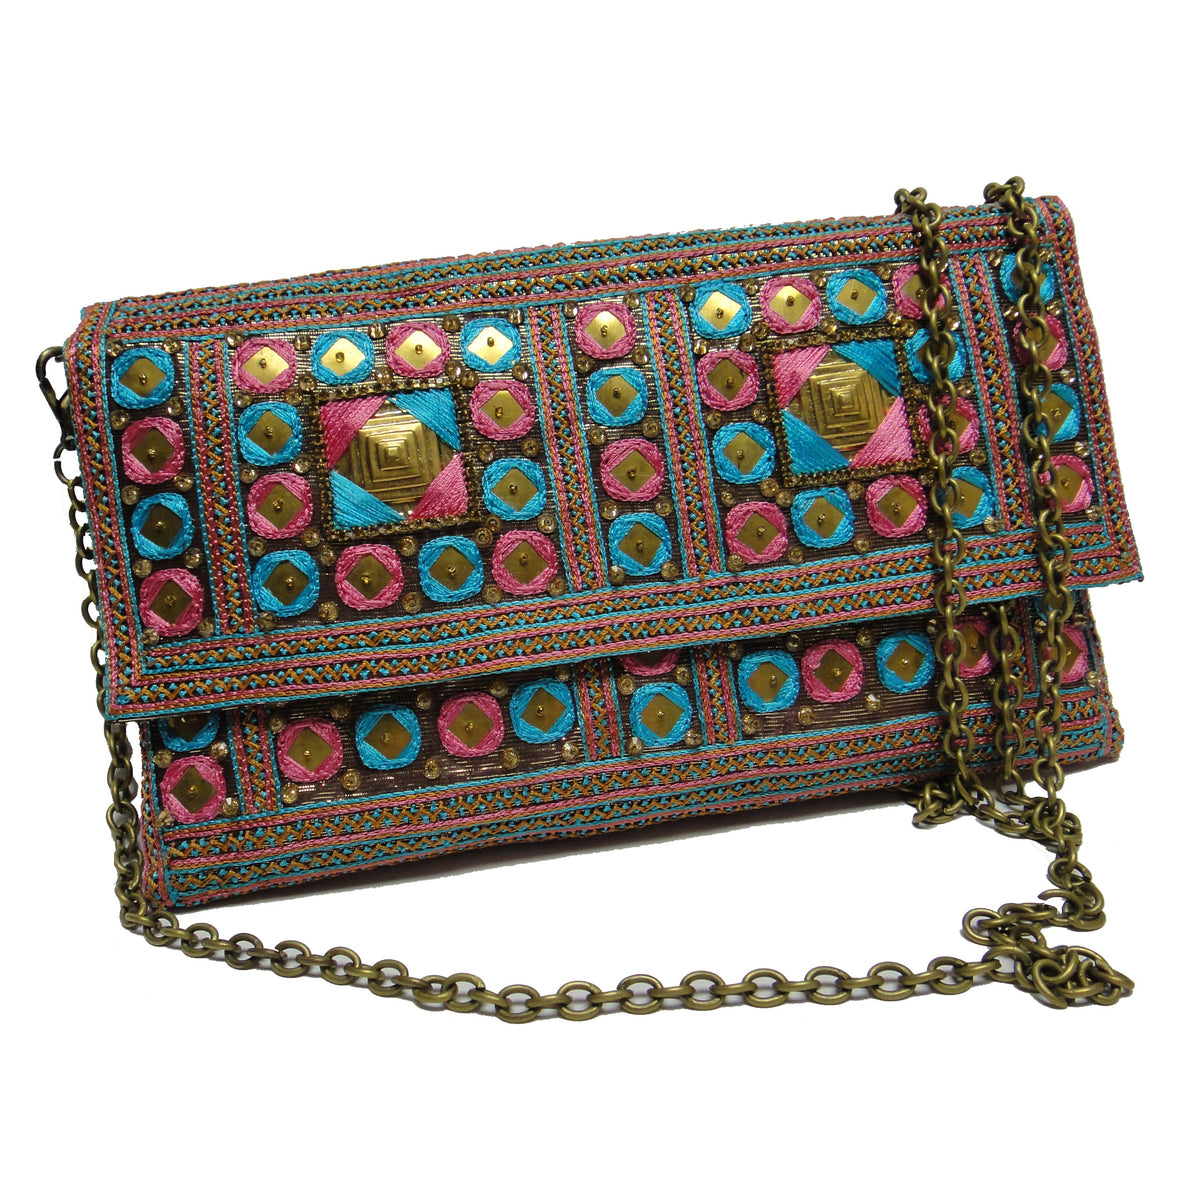 Beaded Fuchsia and Turquoise Mirrored Clutch